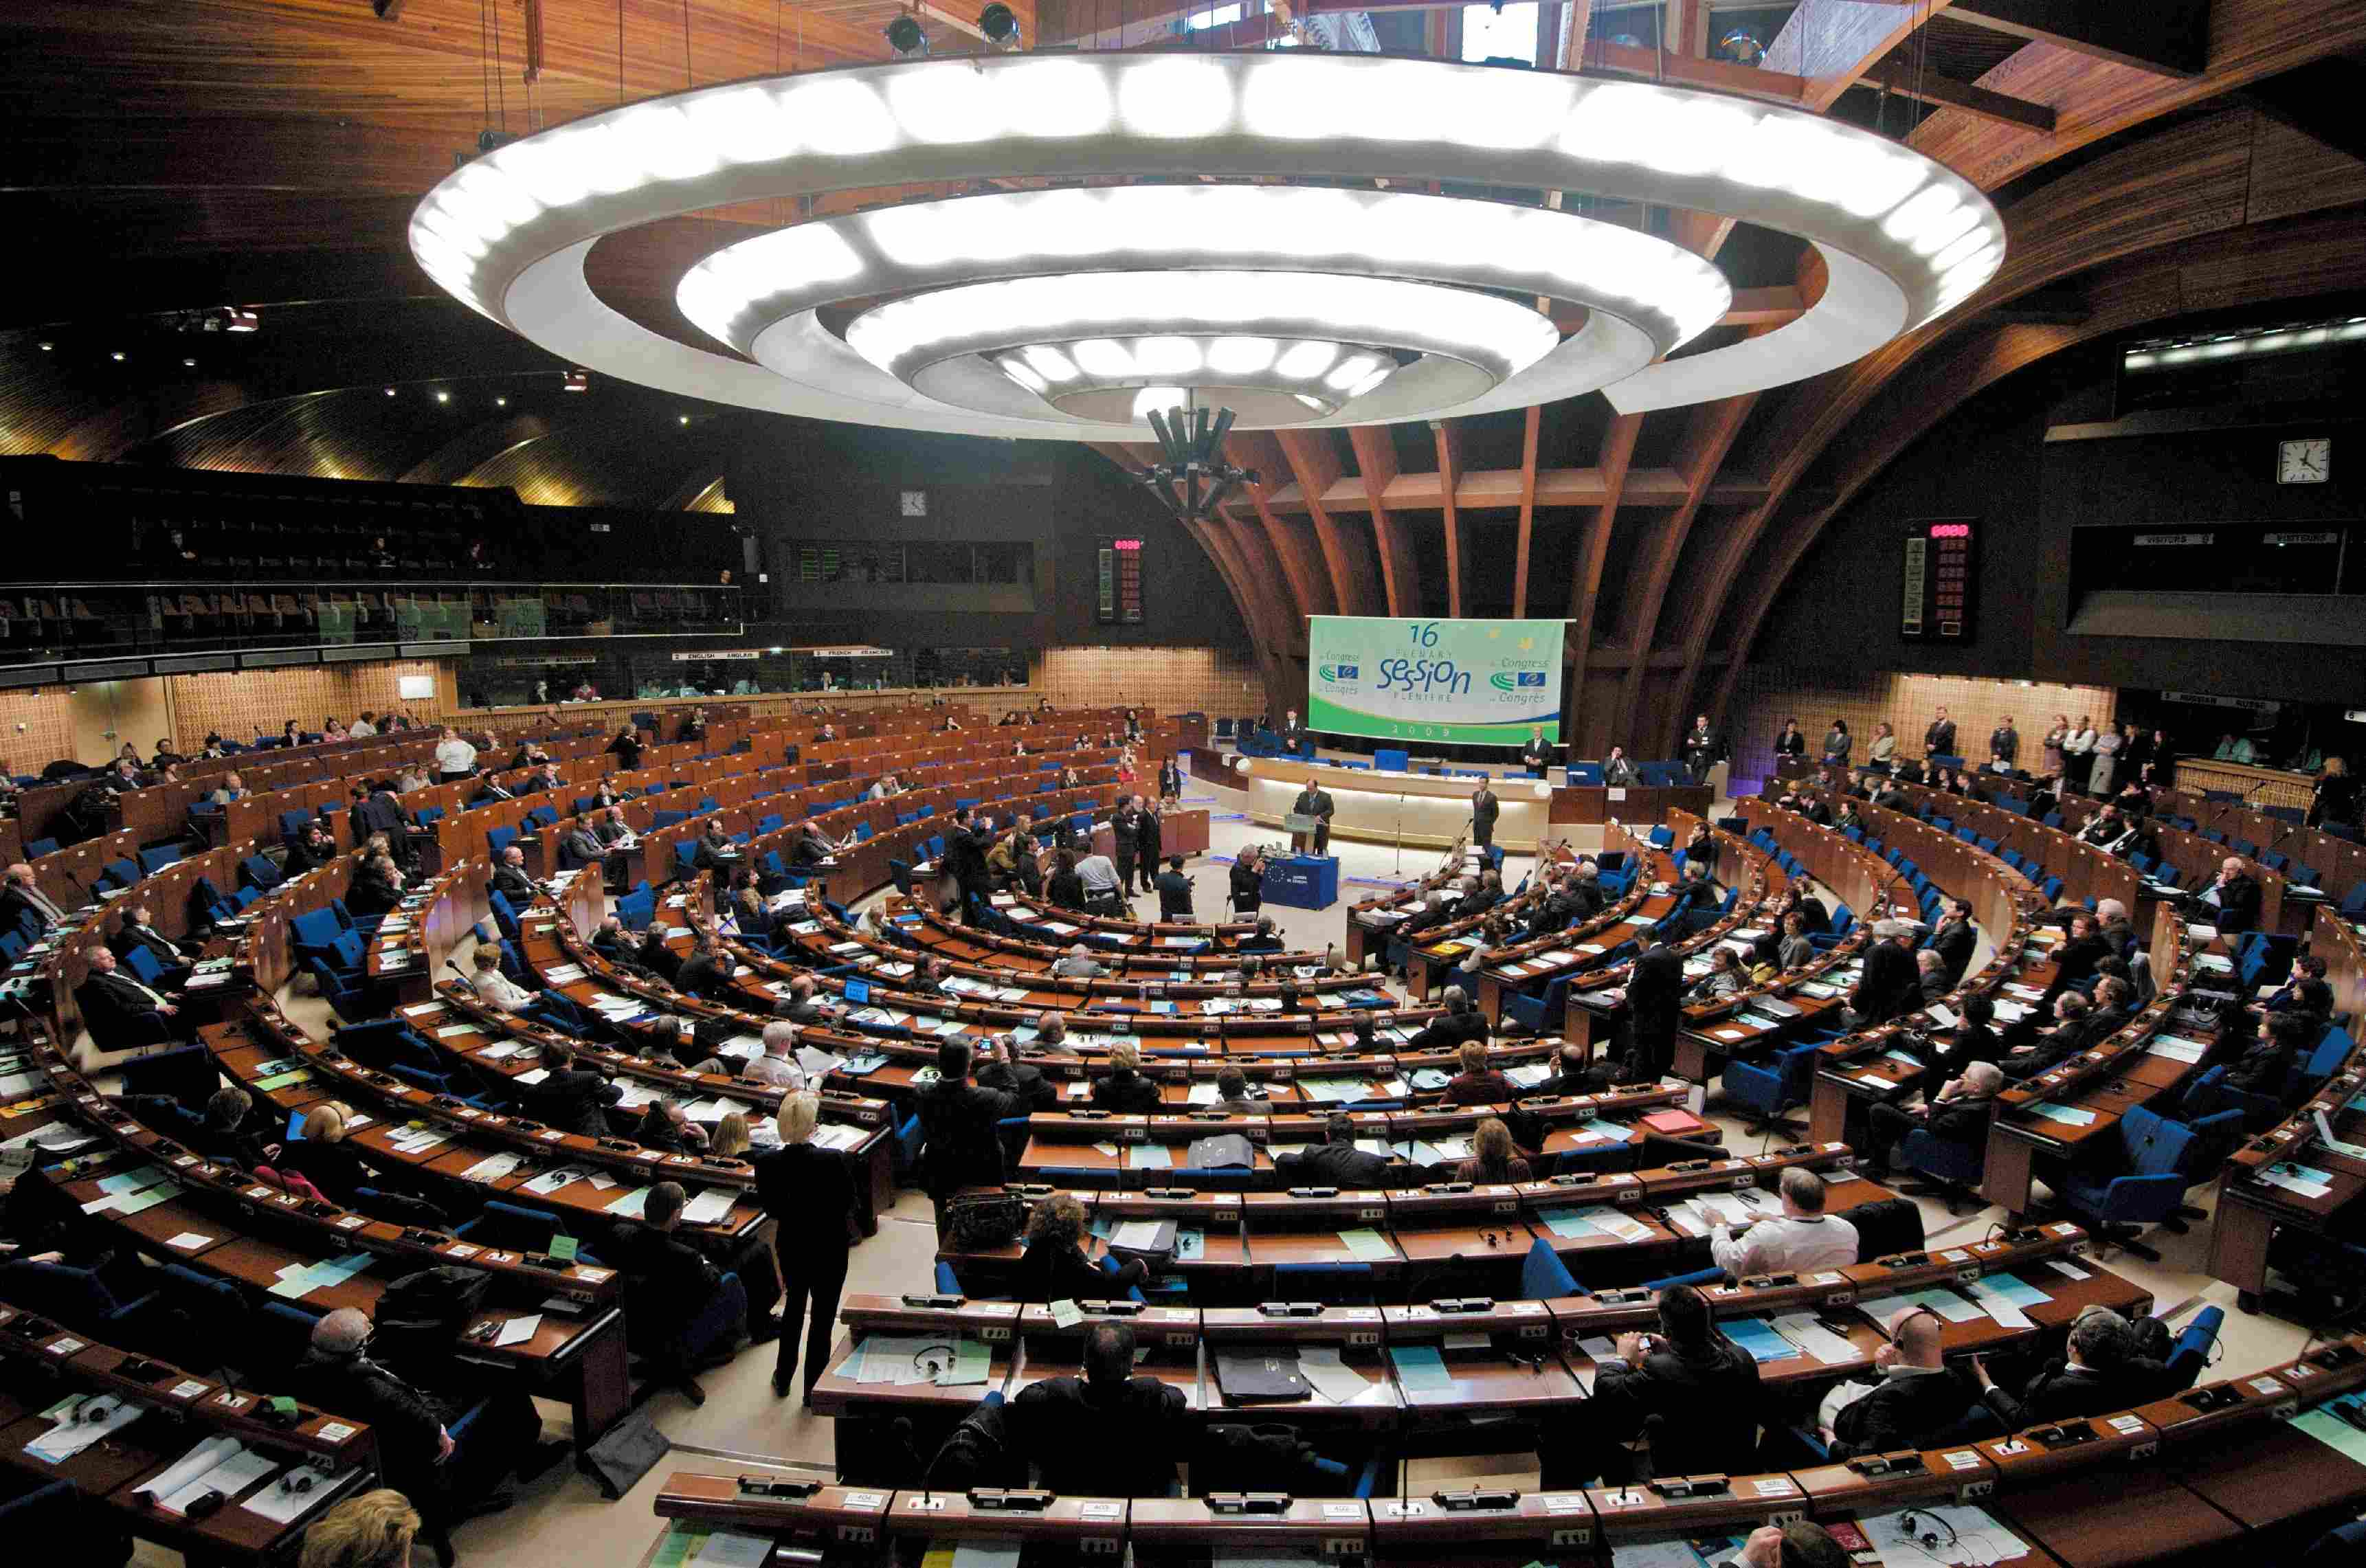 Council of Europe to investigate "politicians imprisoned for exercising their freedom of speech"